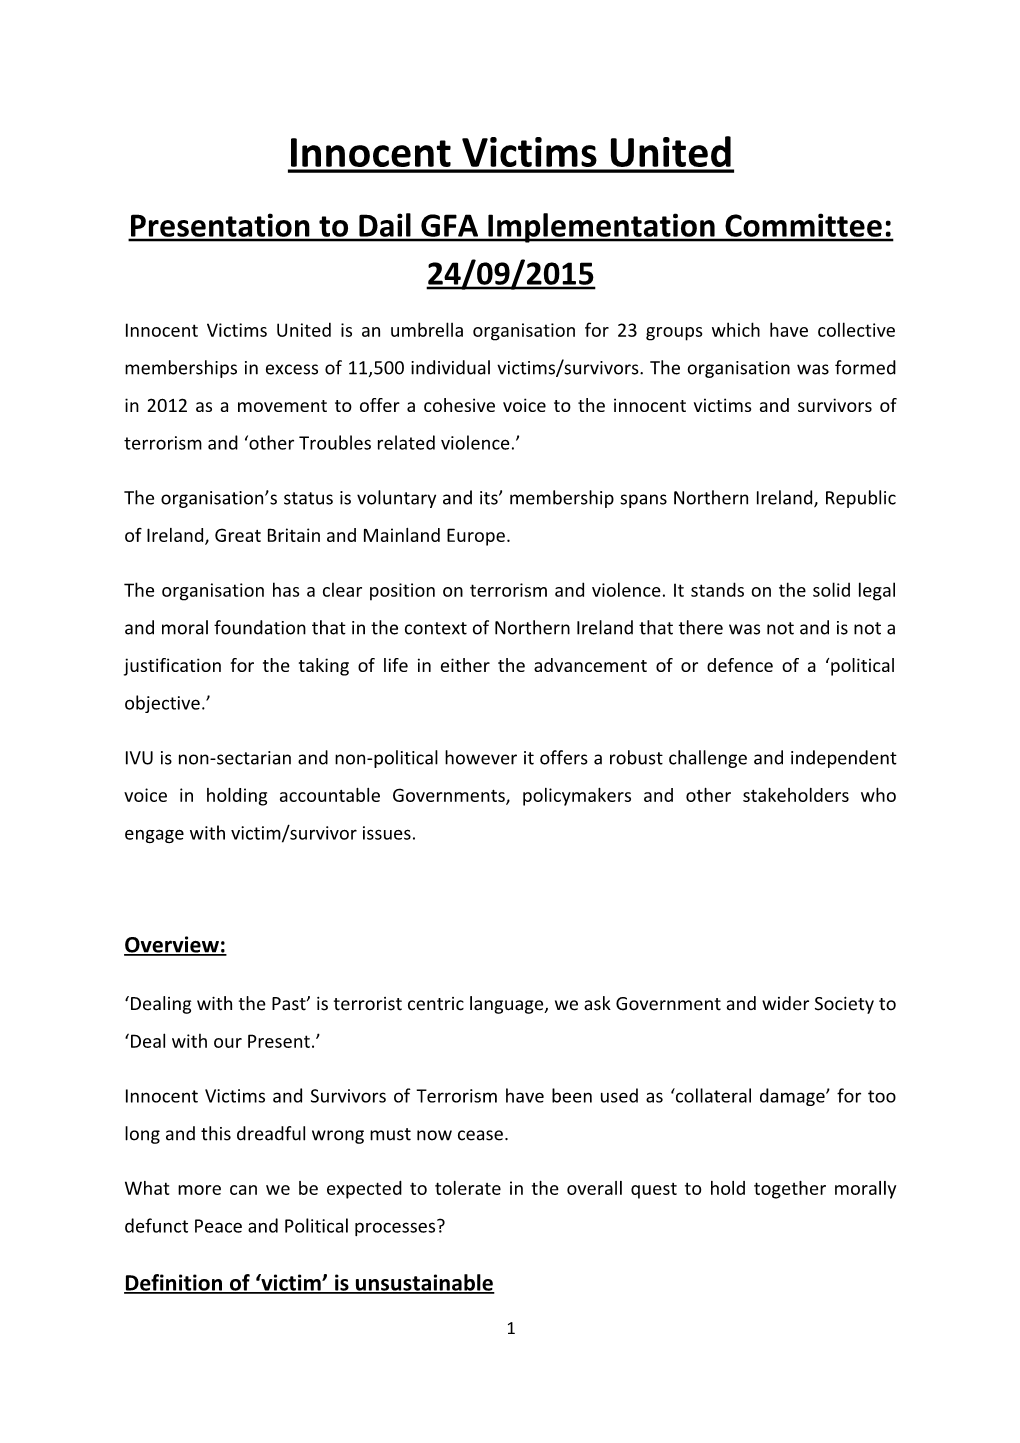 Presentation to Dail GFA Implementation Committee: 24/09/2015